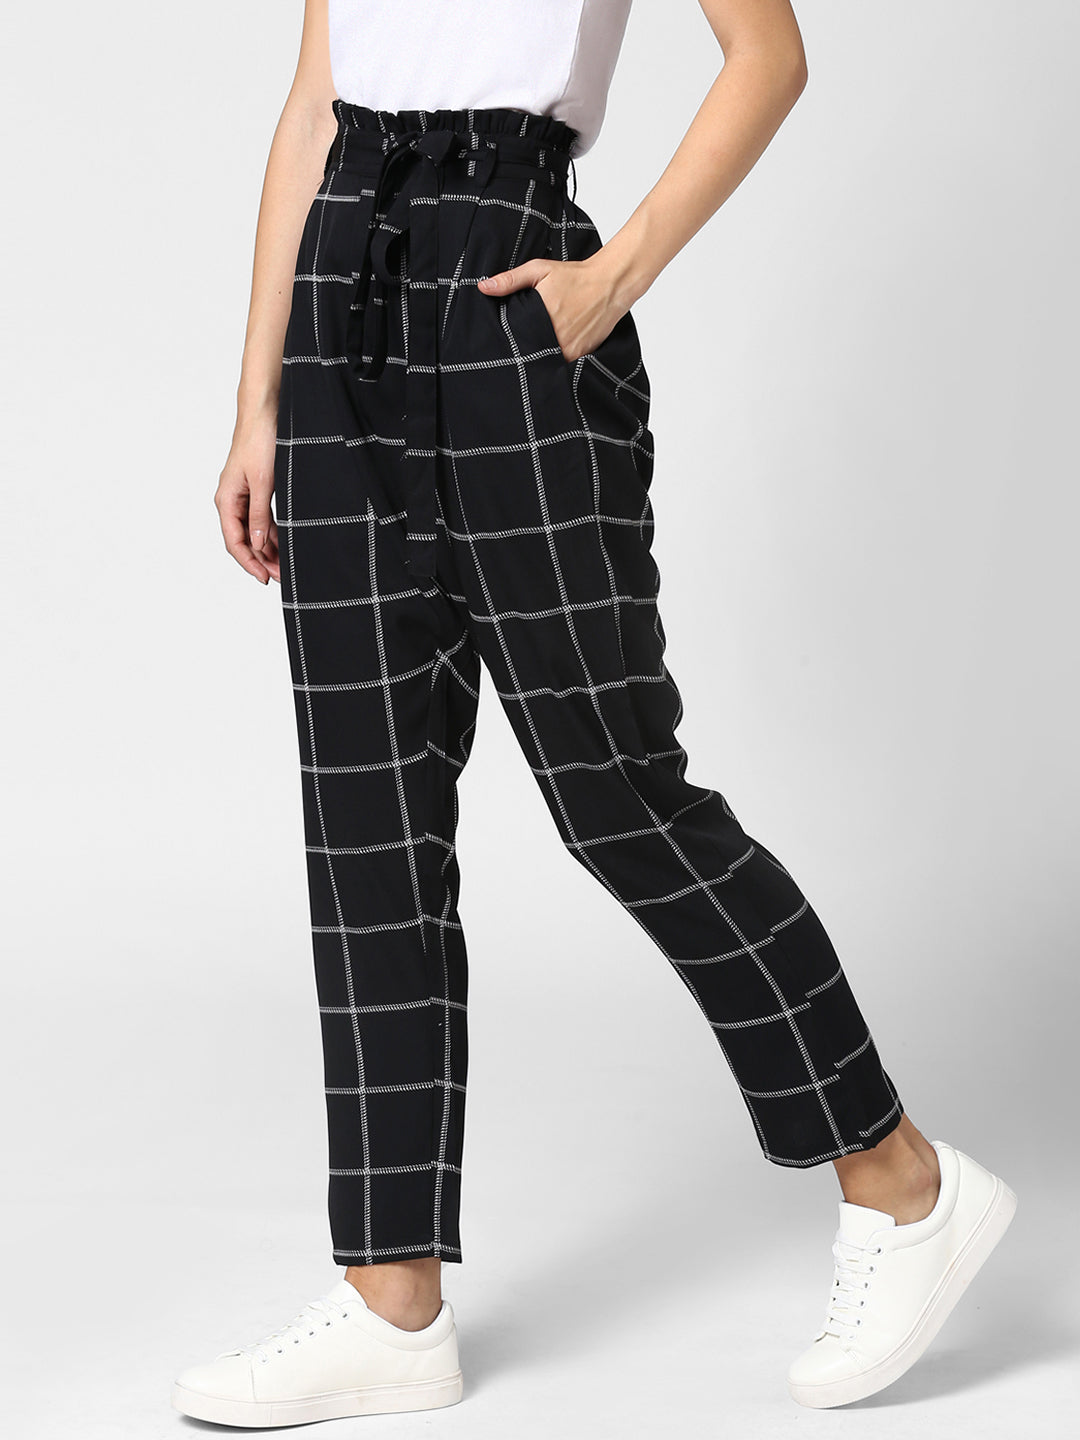 Women's Black and White Check Paperbag Pants with elasticated waistband